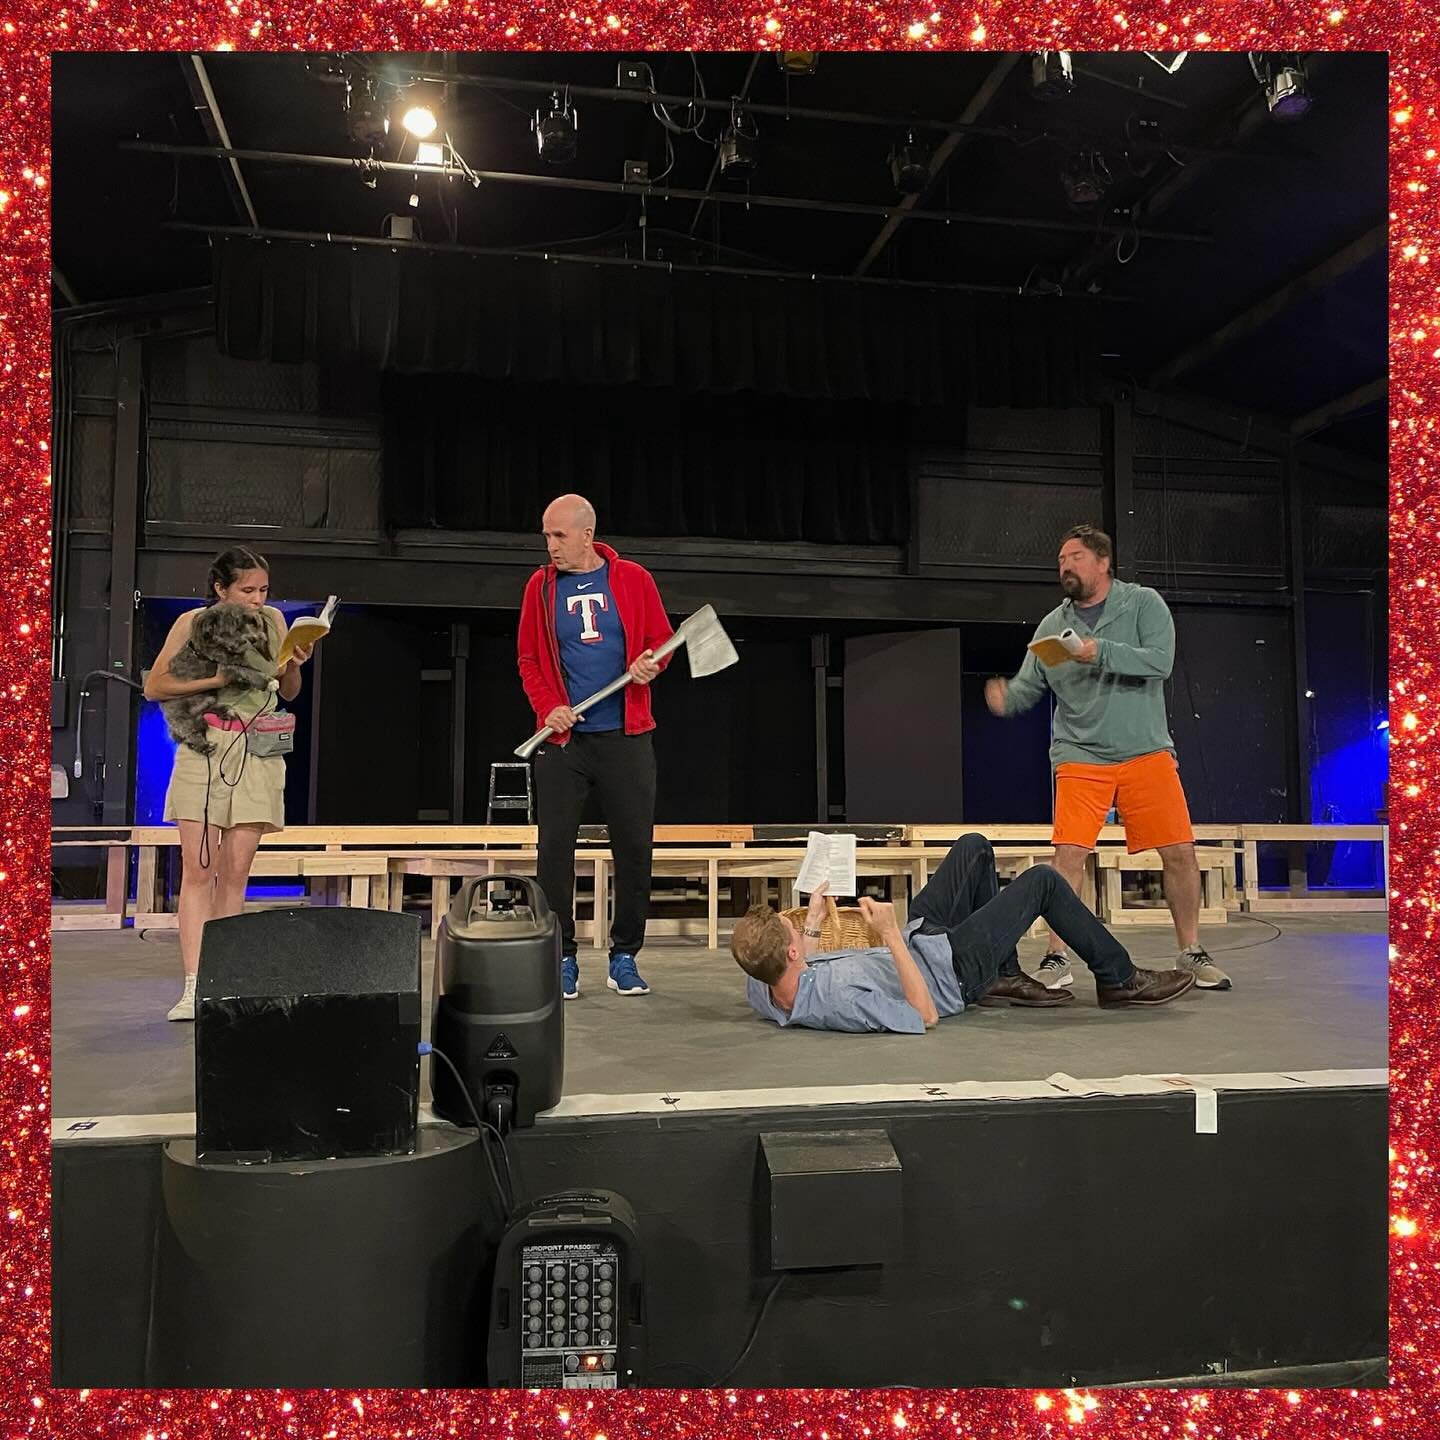 Check out these rehearsal pics of #TheWizardOfOz, the first show of season 28! ✨🌈👠🎶🎭
Can you guess which scenes are being worked on in these photos?